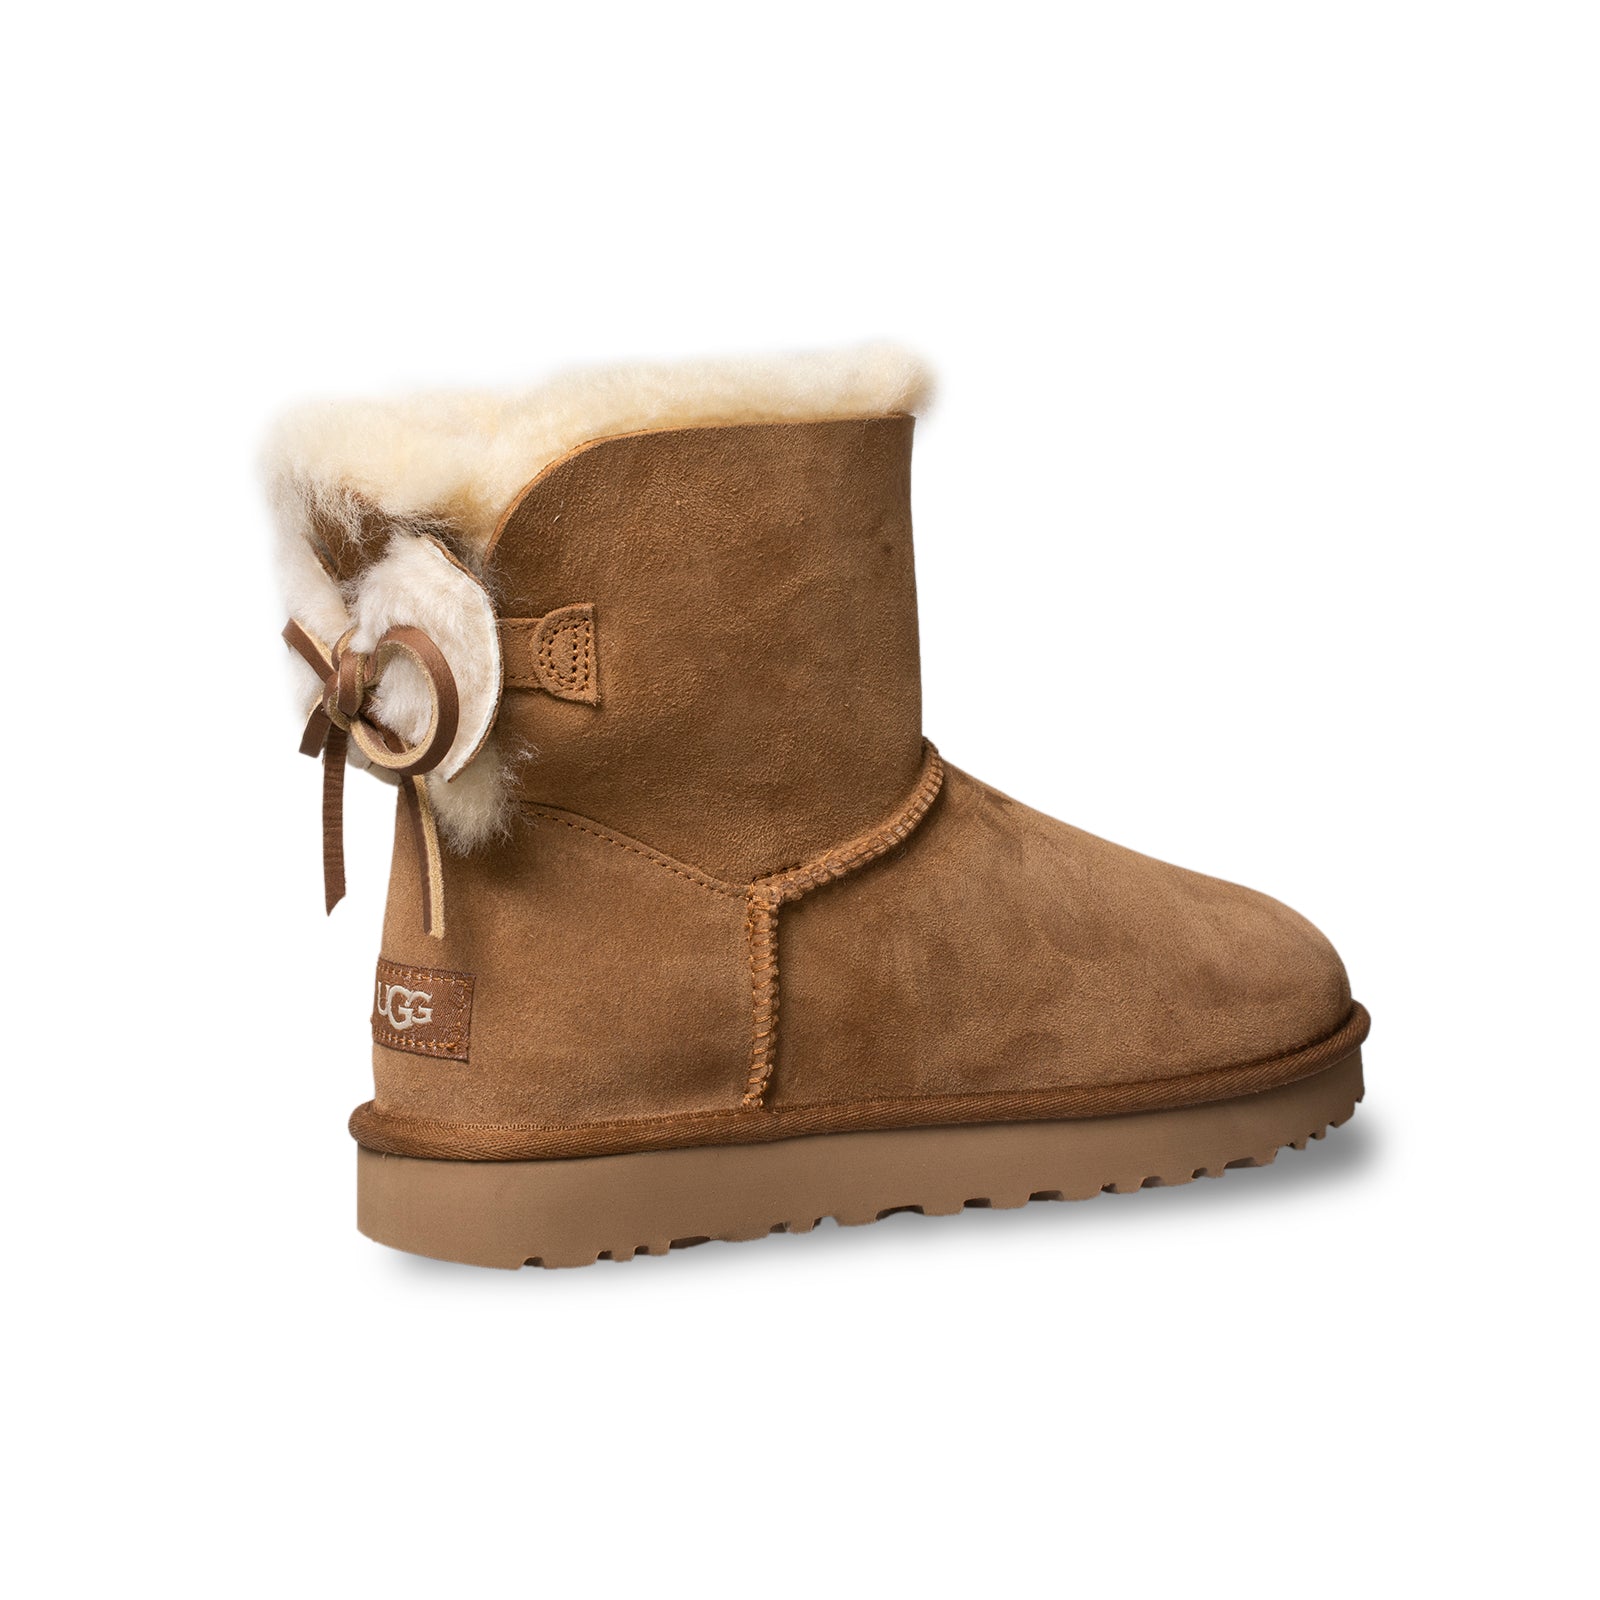 double bow uggs